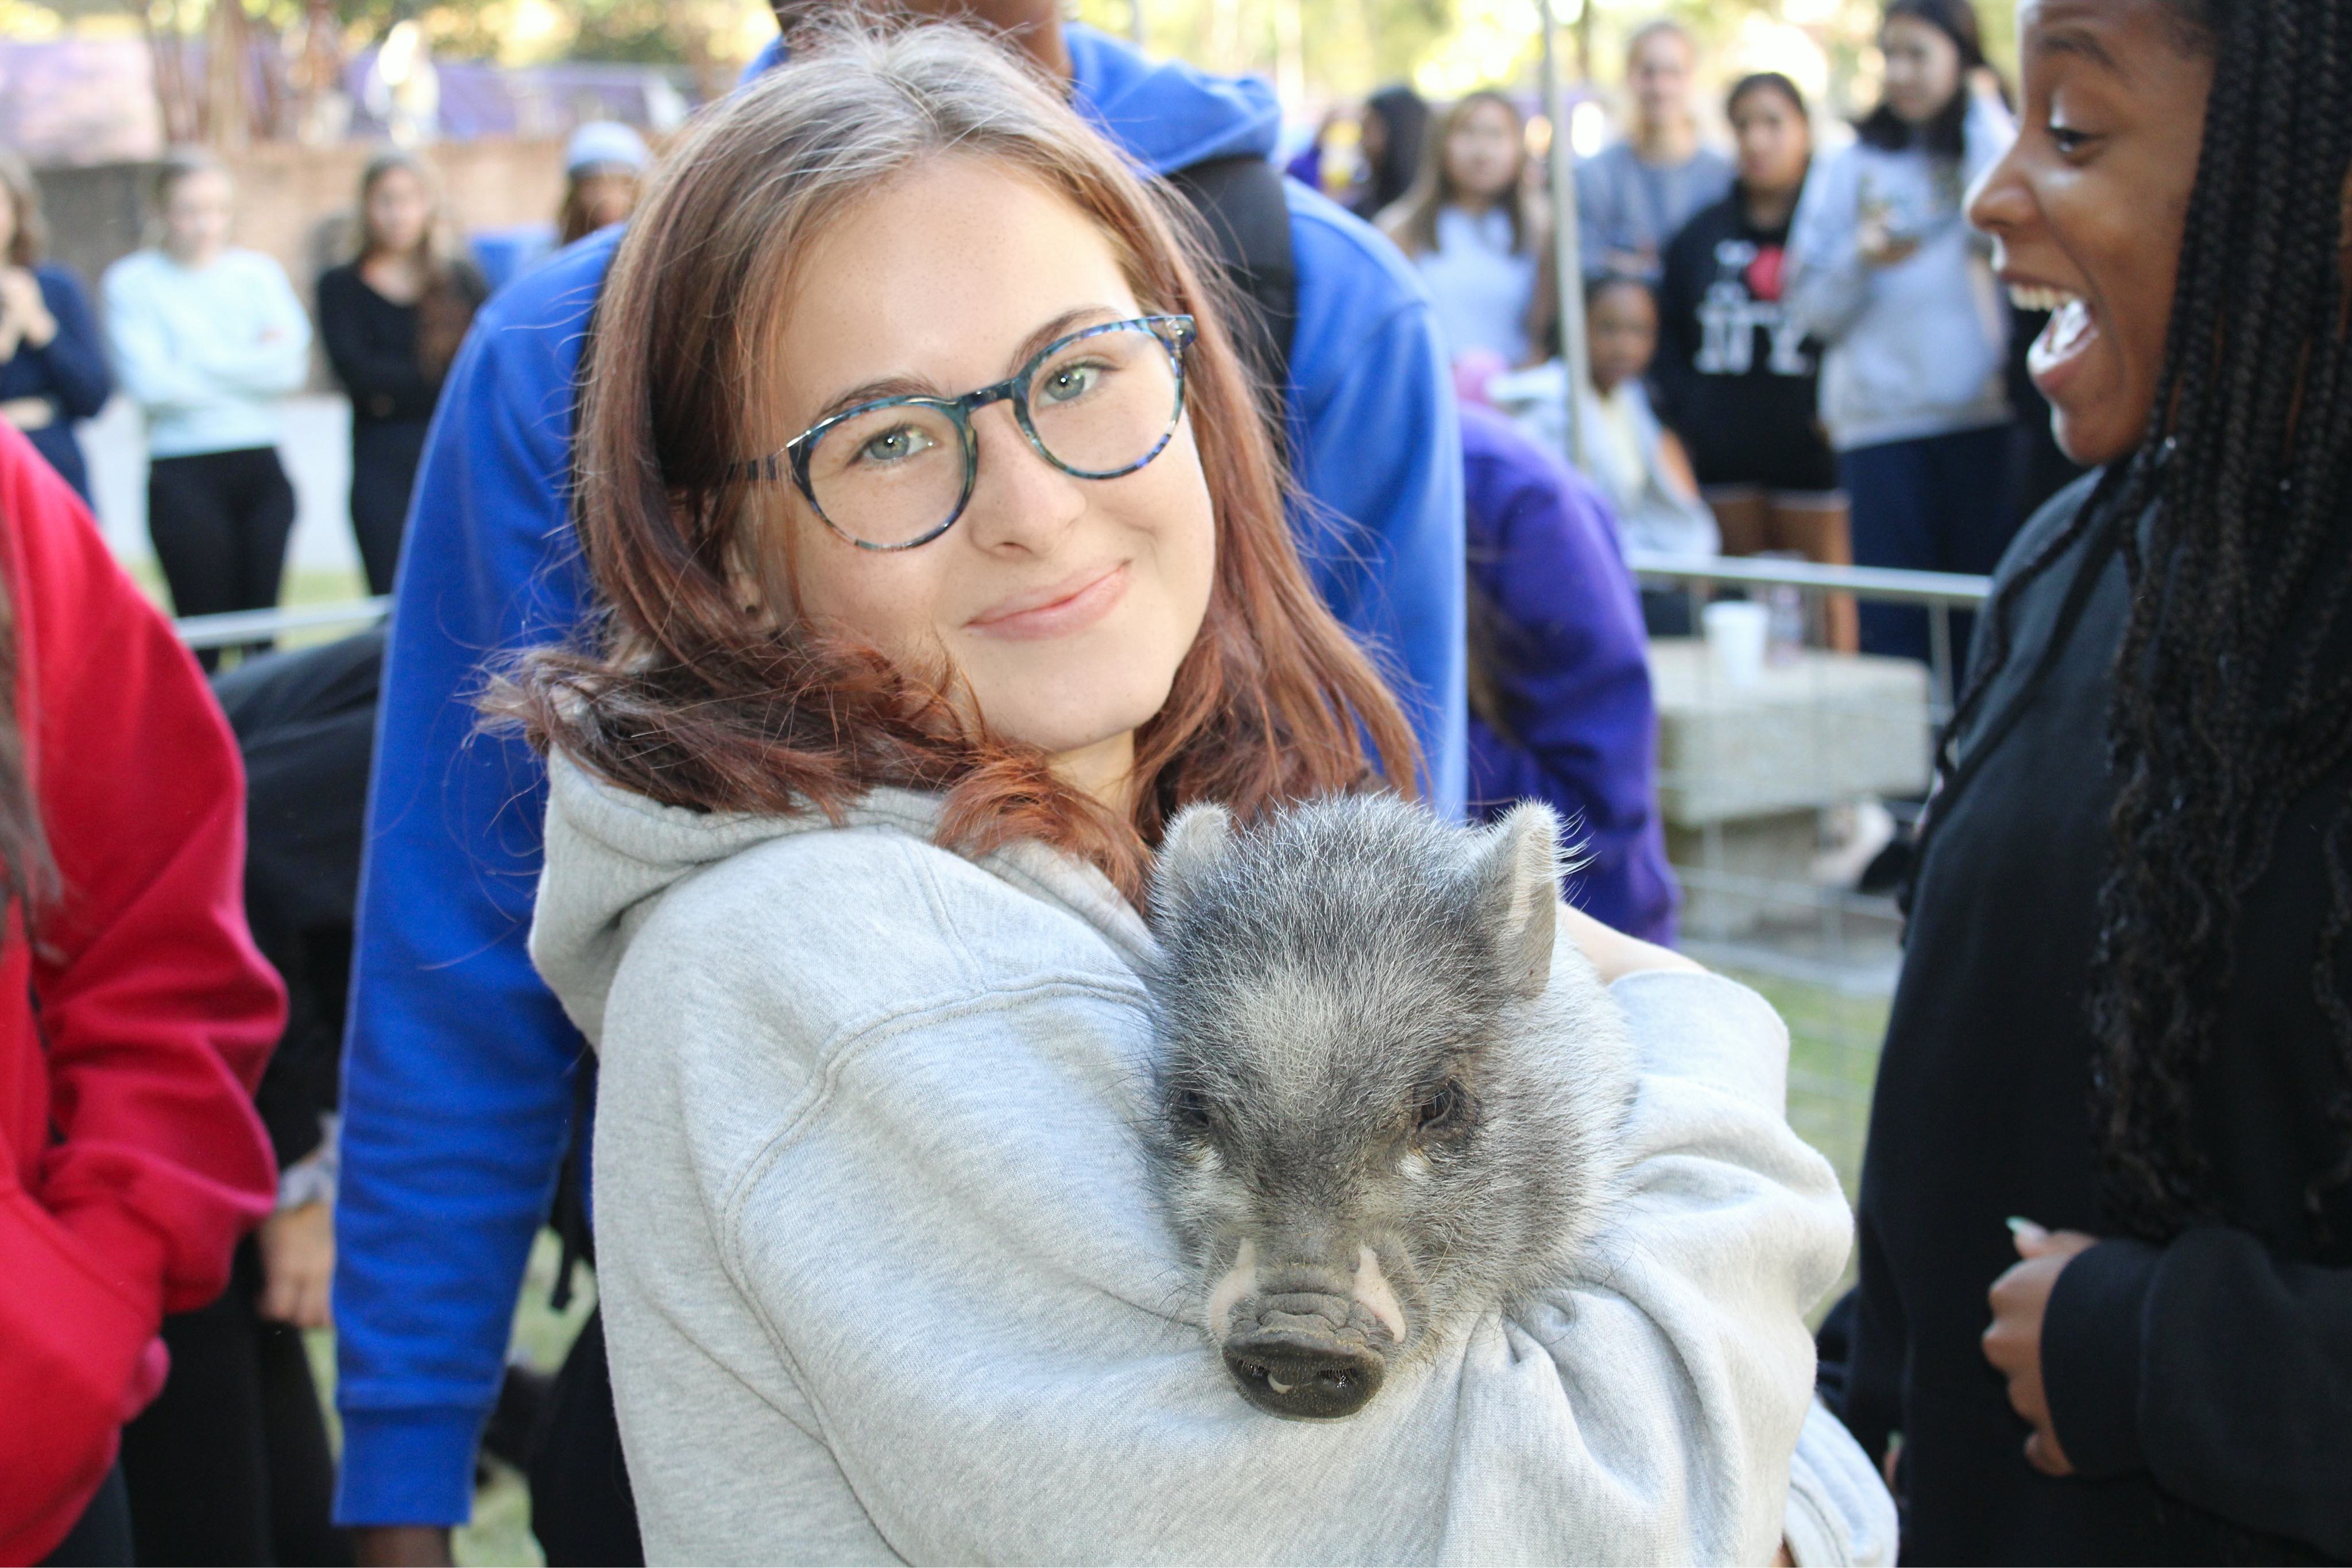 Student holding a pig at Cypress Hall event